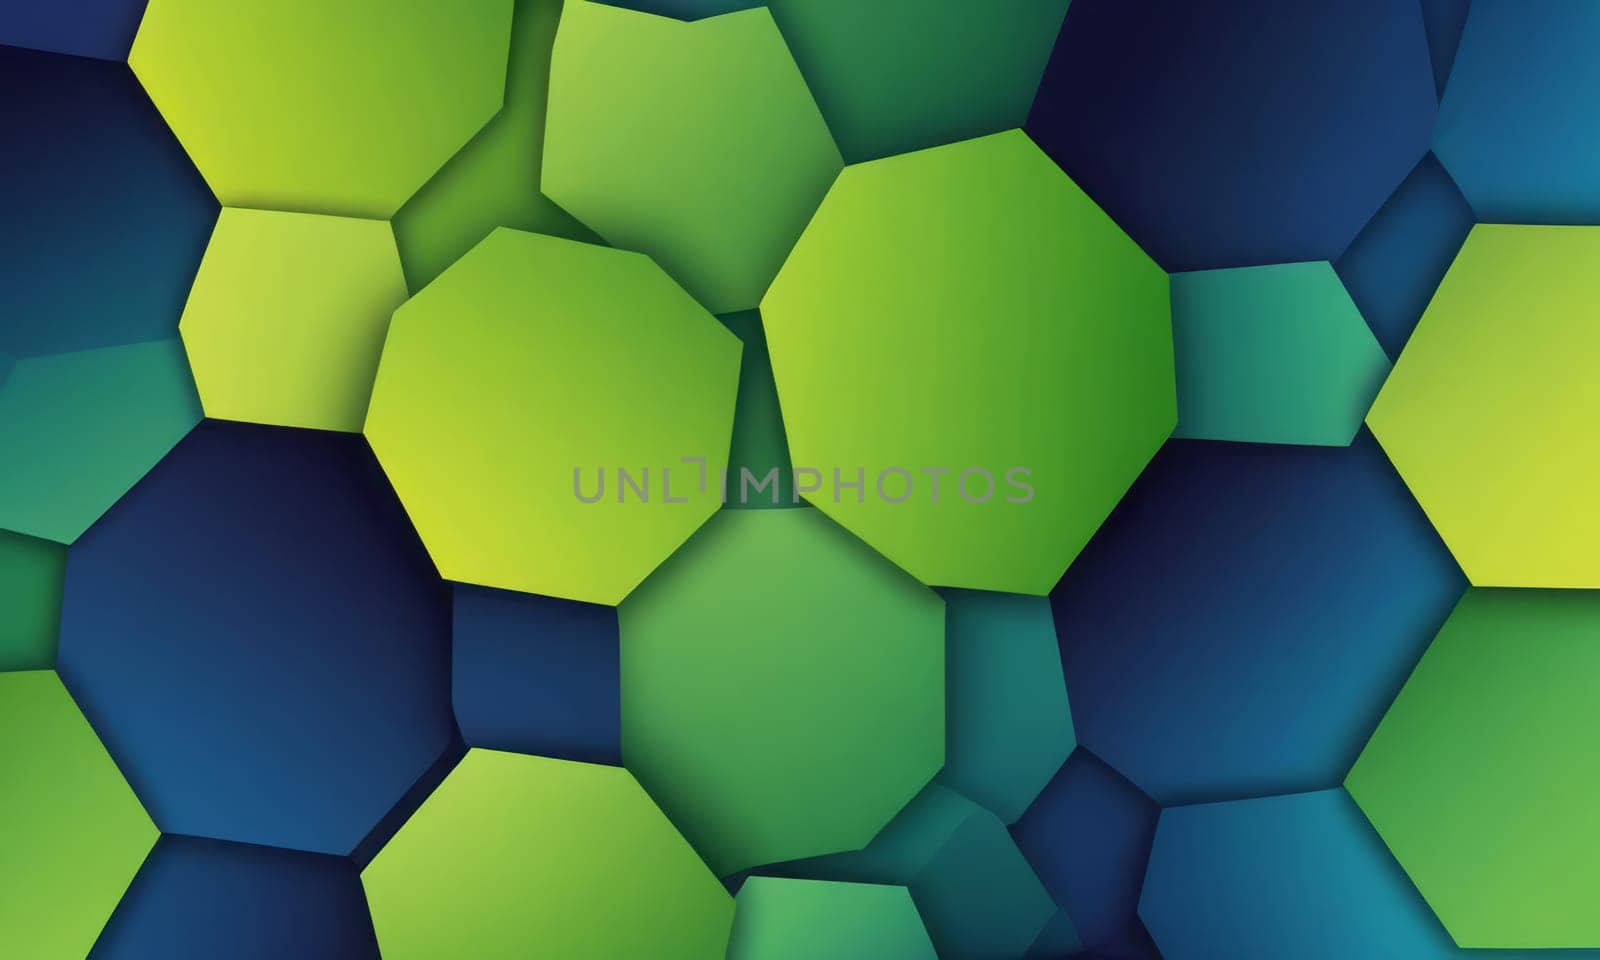 Octagonal Shapes in Lime Midnight blue by nkotlyar